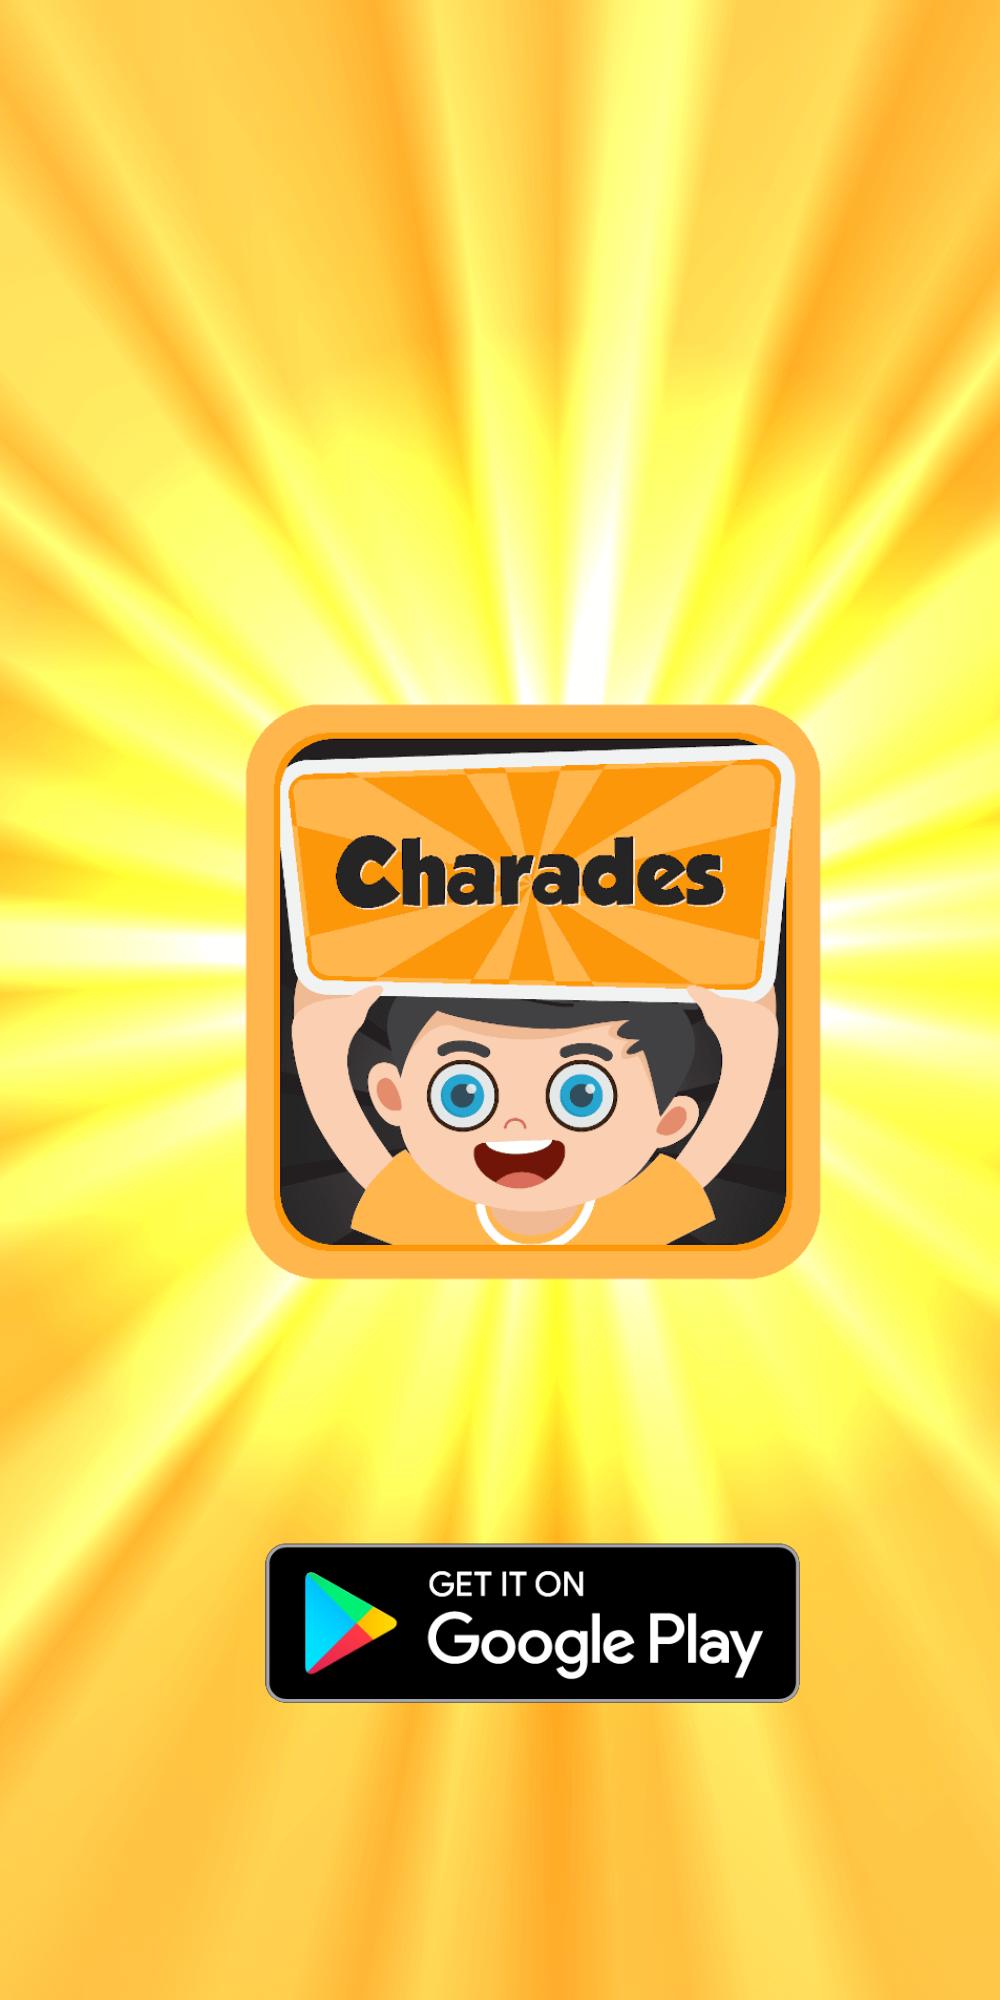 Family Charades Friendly Word Guessing Game 1.2.0 Screenshot 6